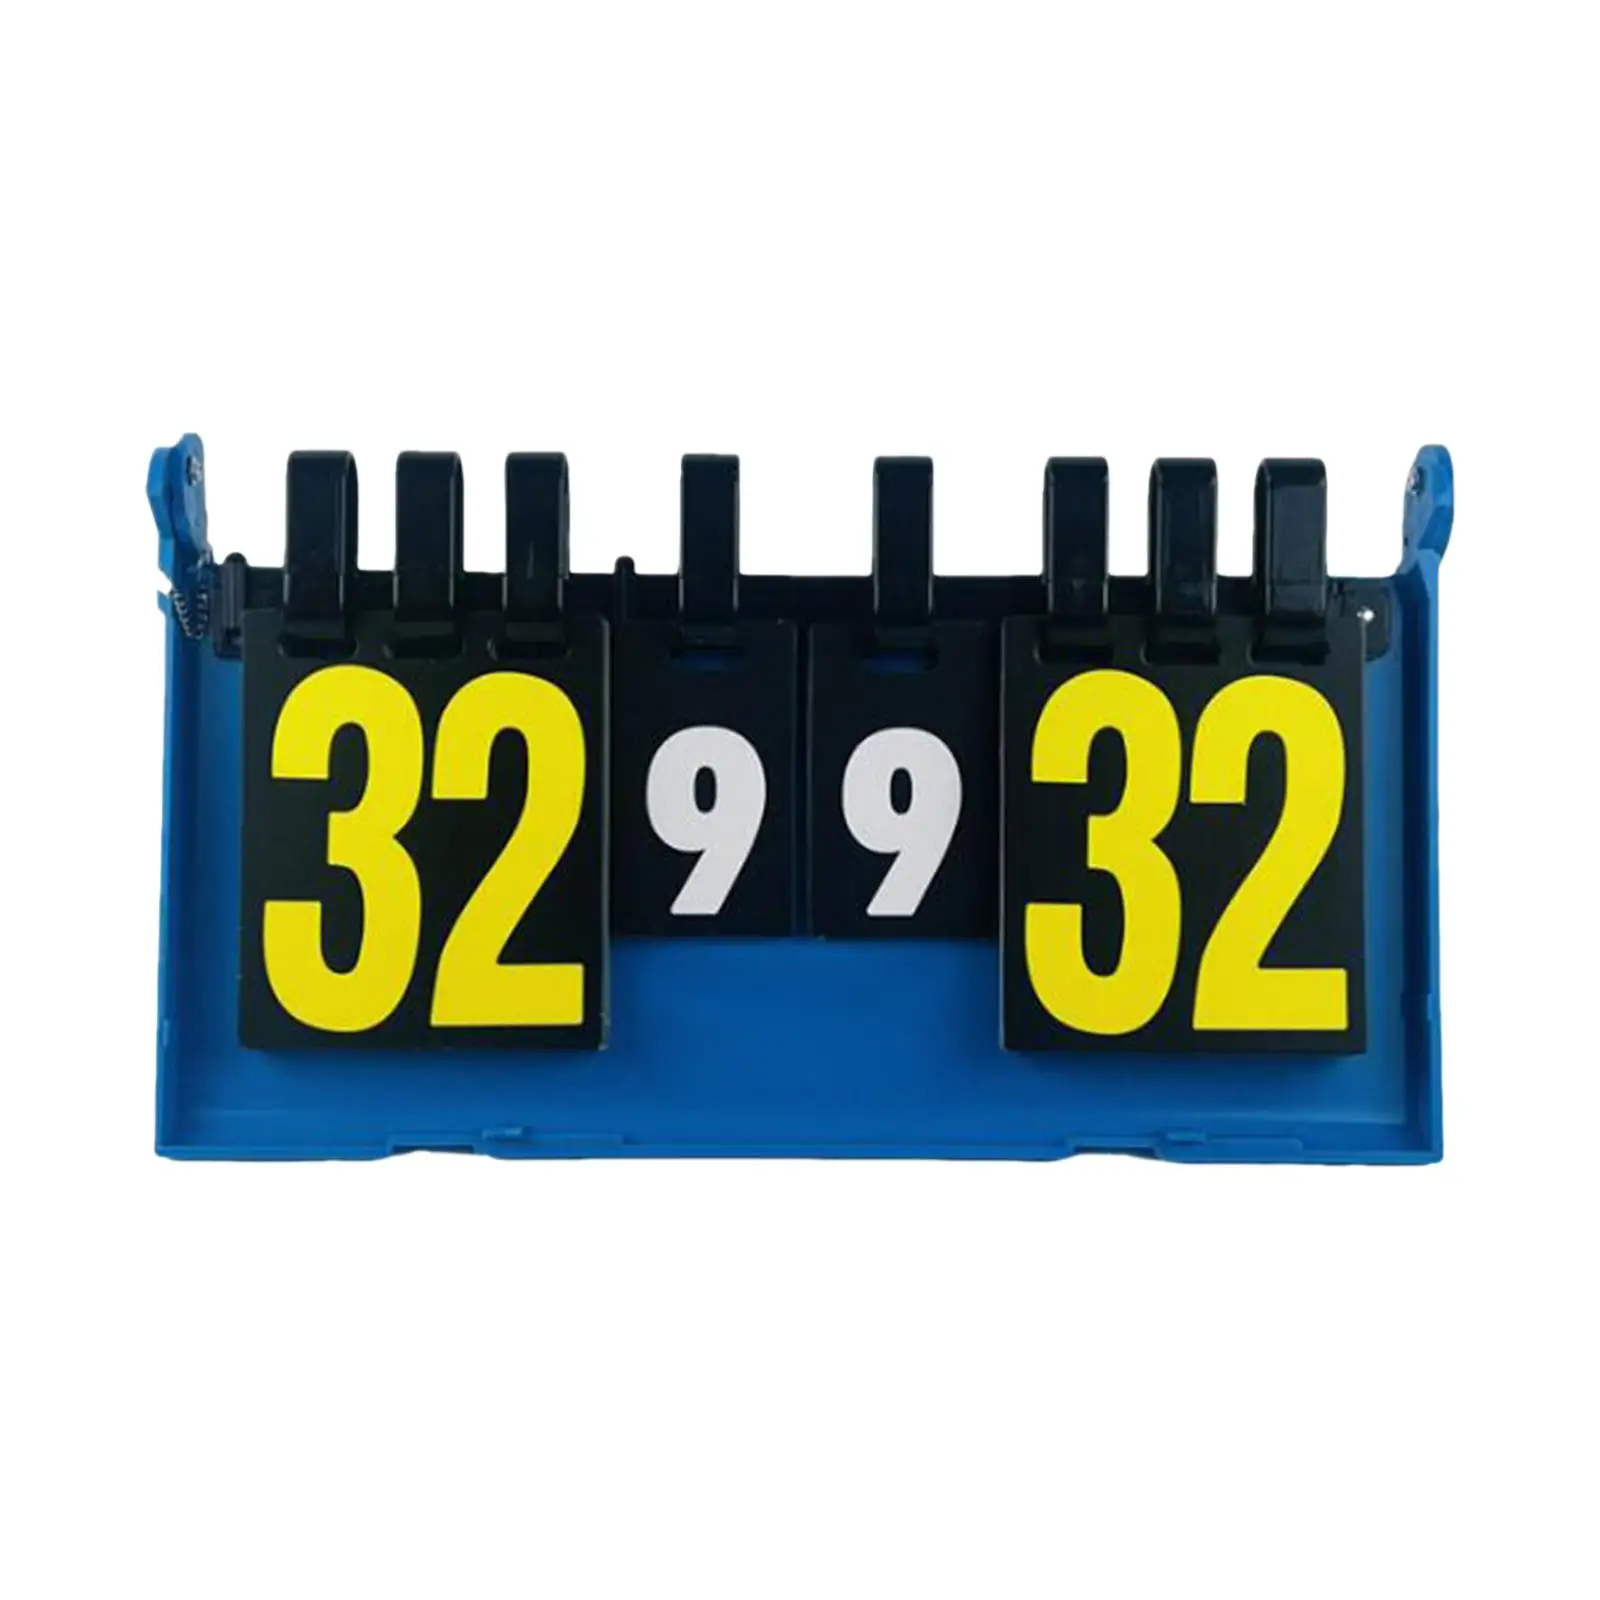 Score Board 39cmx21cm Large Size Tabletop or Hanging Score Keeper for Pingpong Soccer Indoor Outdoor Hockey Competitive Sports